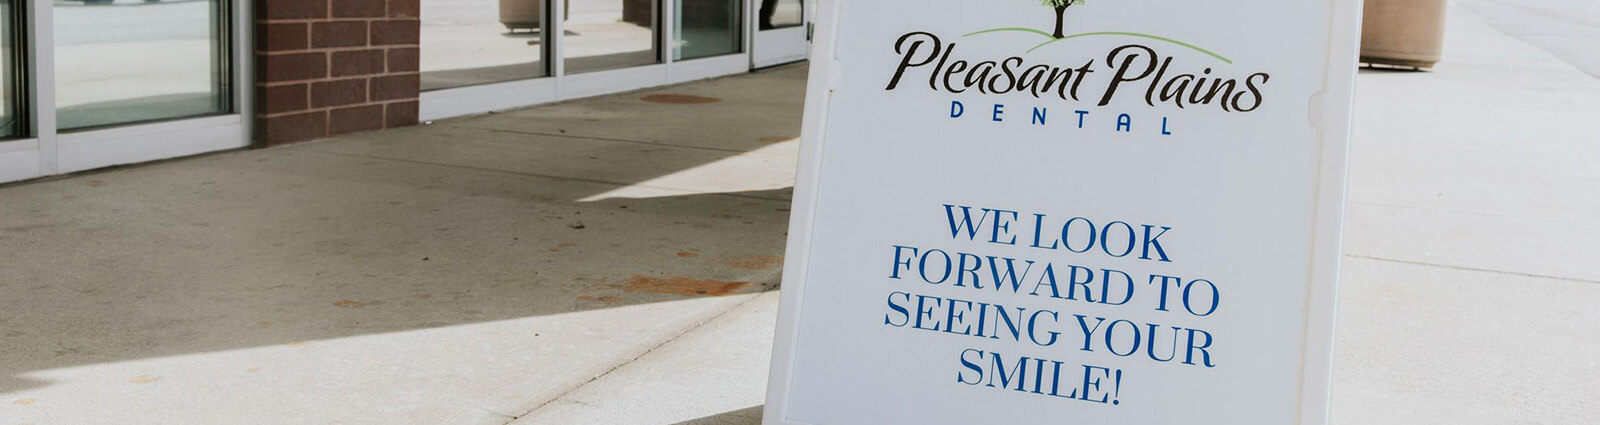 sign that says 'We Look Forward to Seeing You Smile'